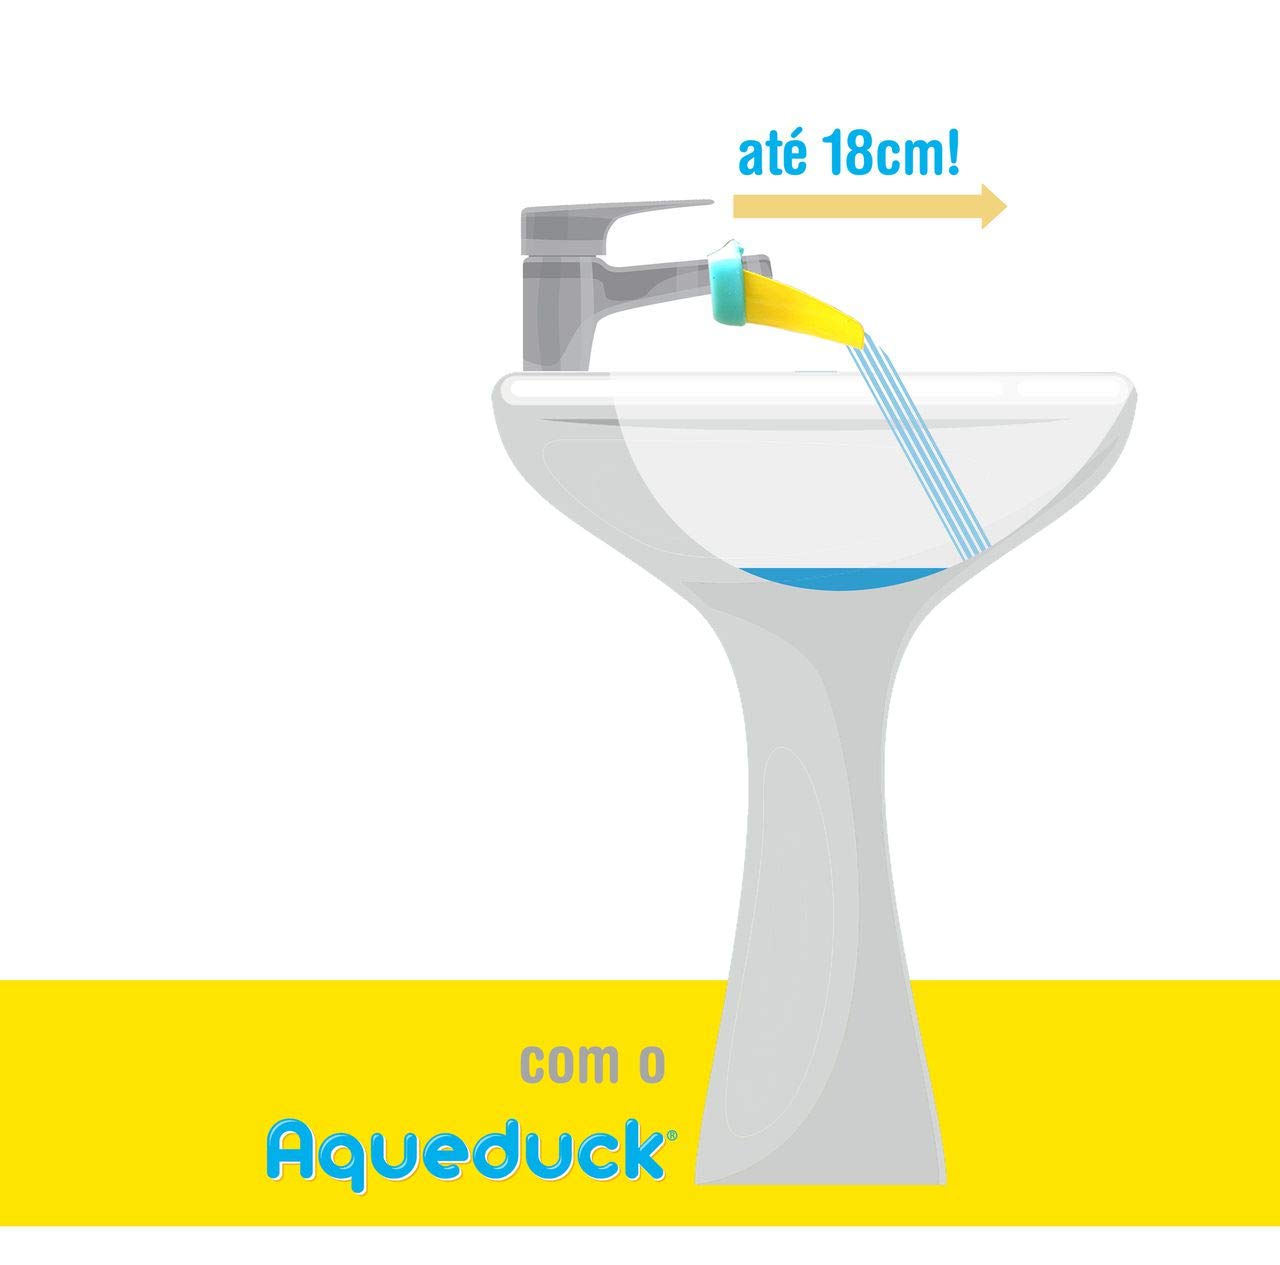 Aqueduck Faucet Extender. Connects to Sink Faucet to Make Washing Hands Fun and Teaches Your Baby or Child Good Habits and Promote Independence to Them